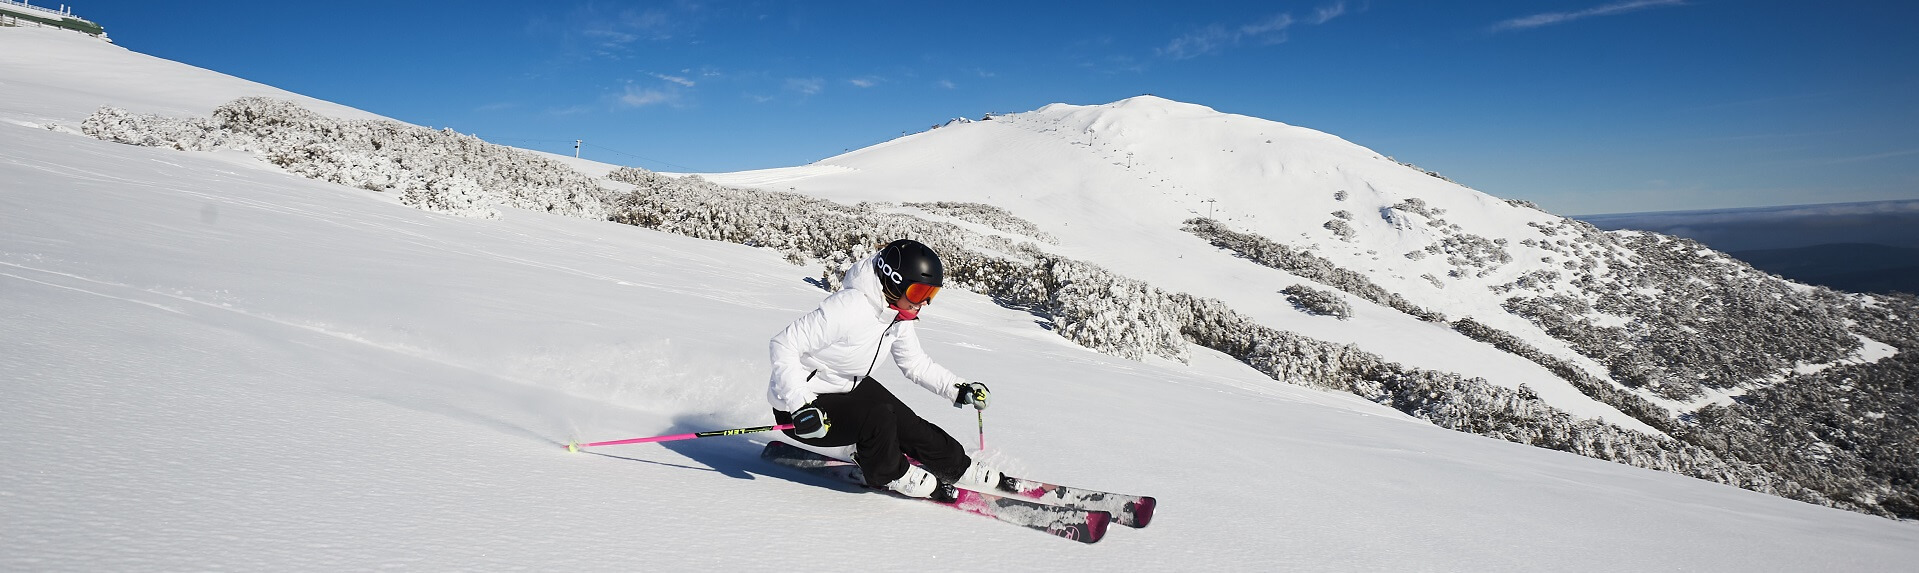 Mount Buller Snow Tour – Return on a Different Day